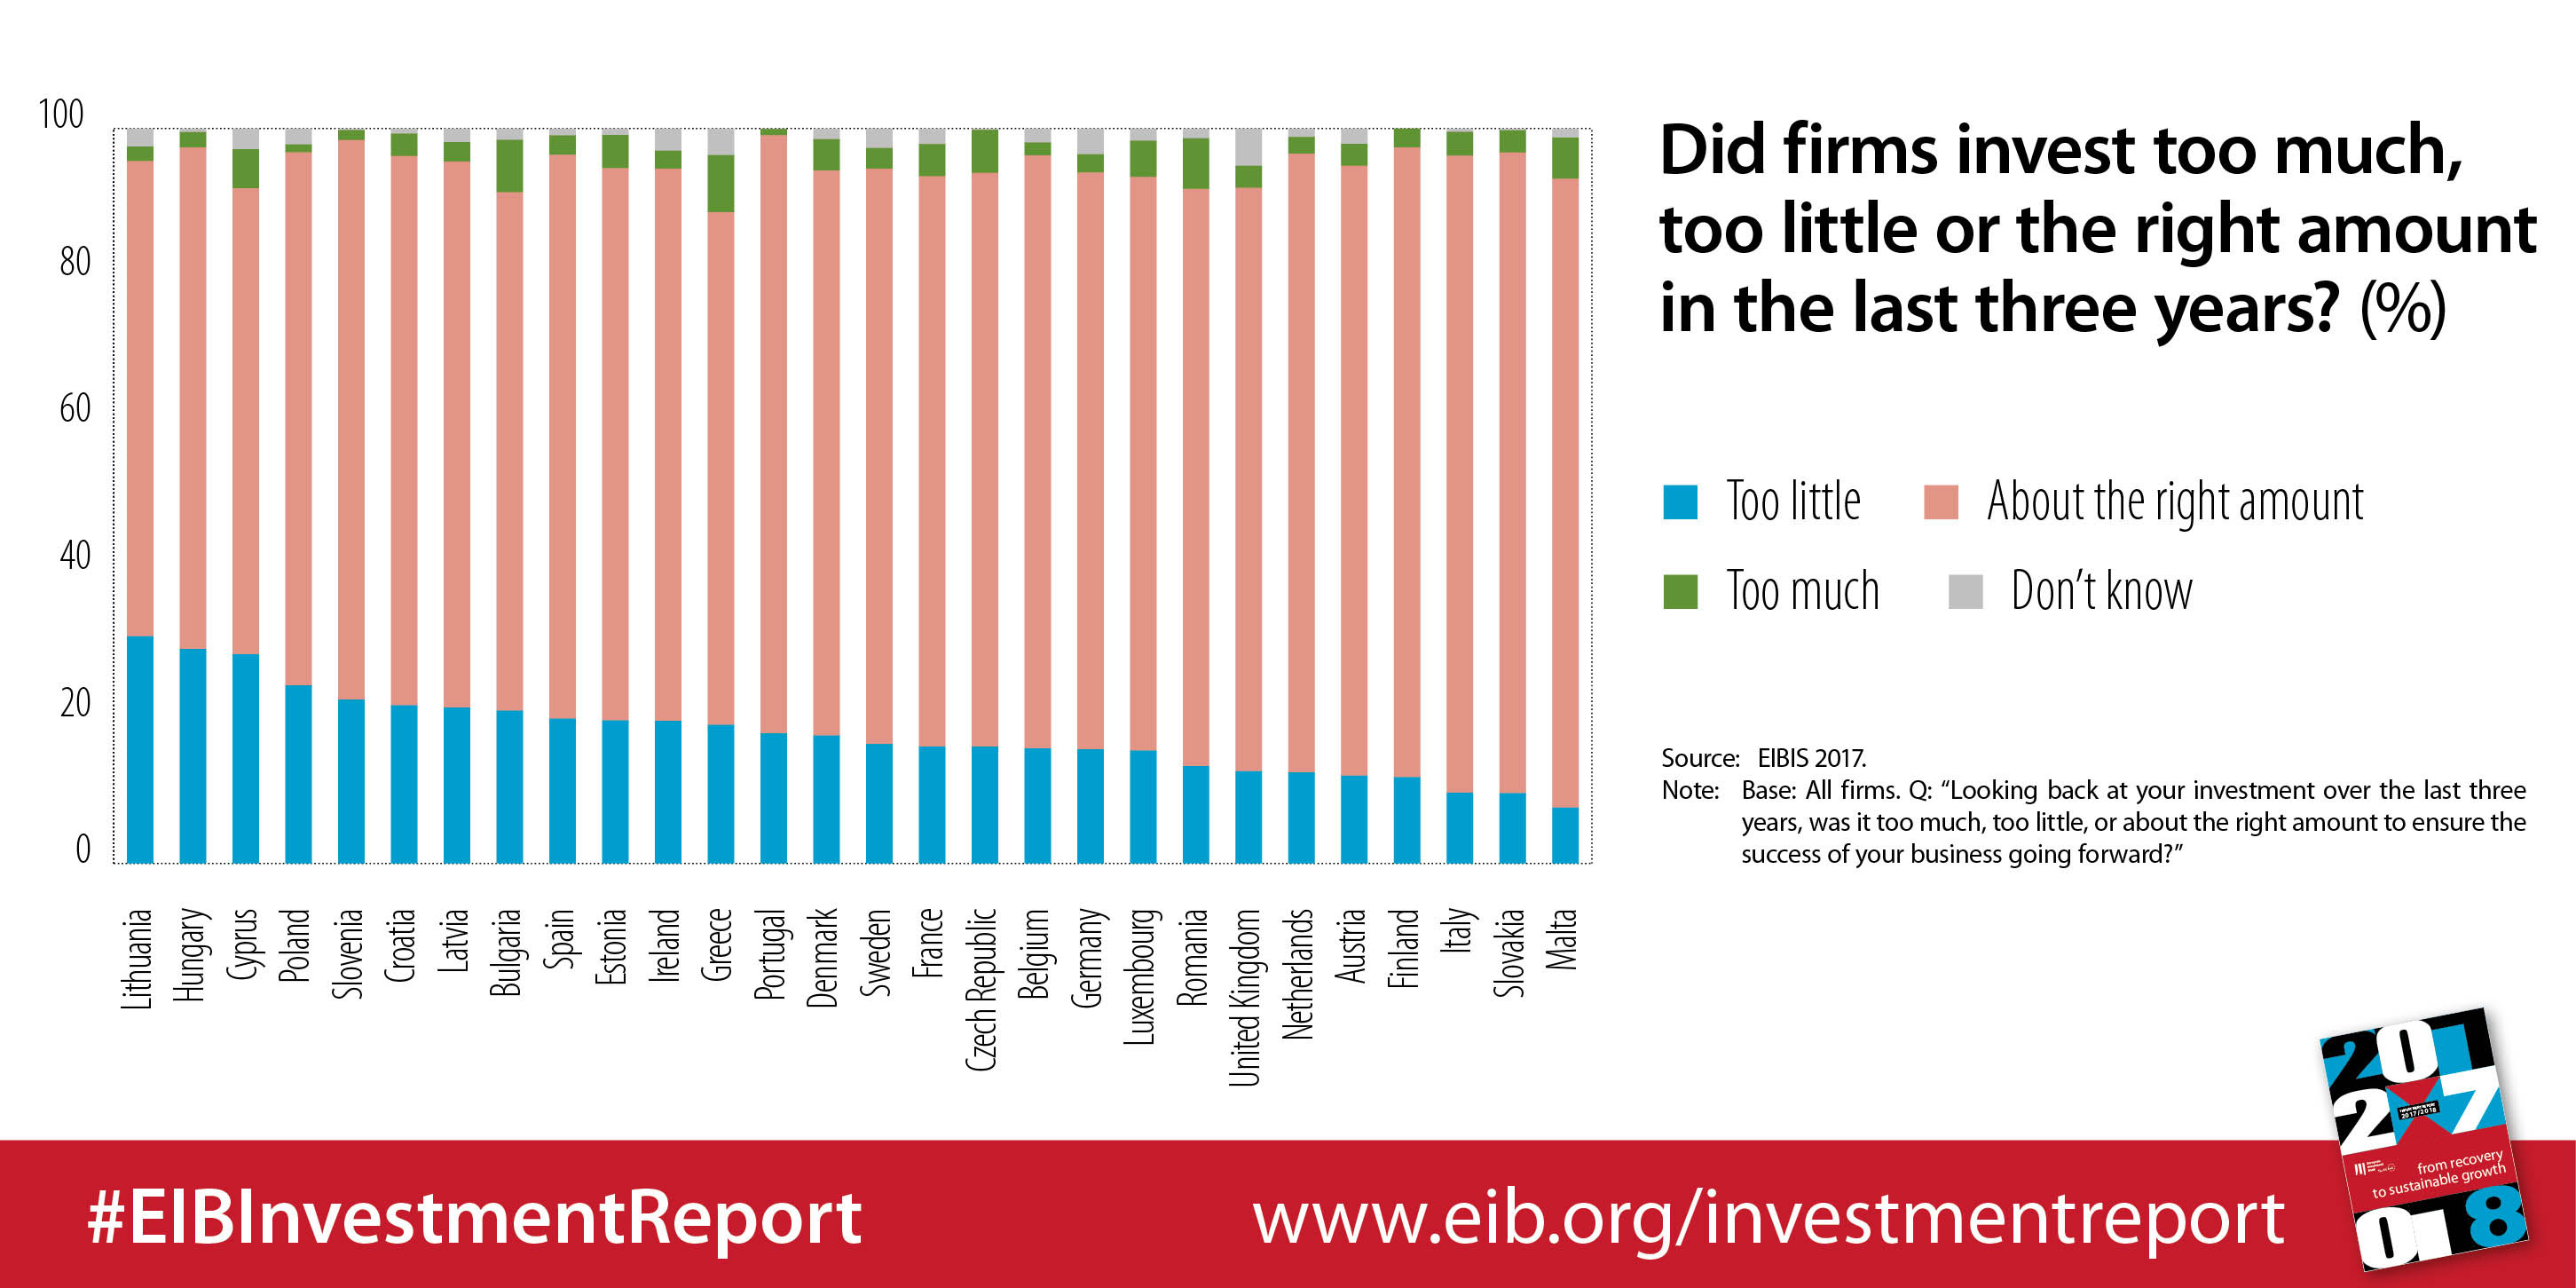 Did firms invest too much, too little or the right amounts in the last three years? (graphic)